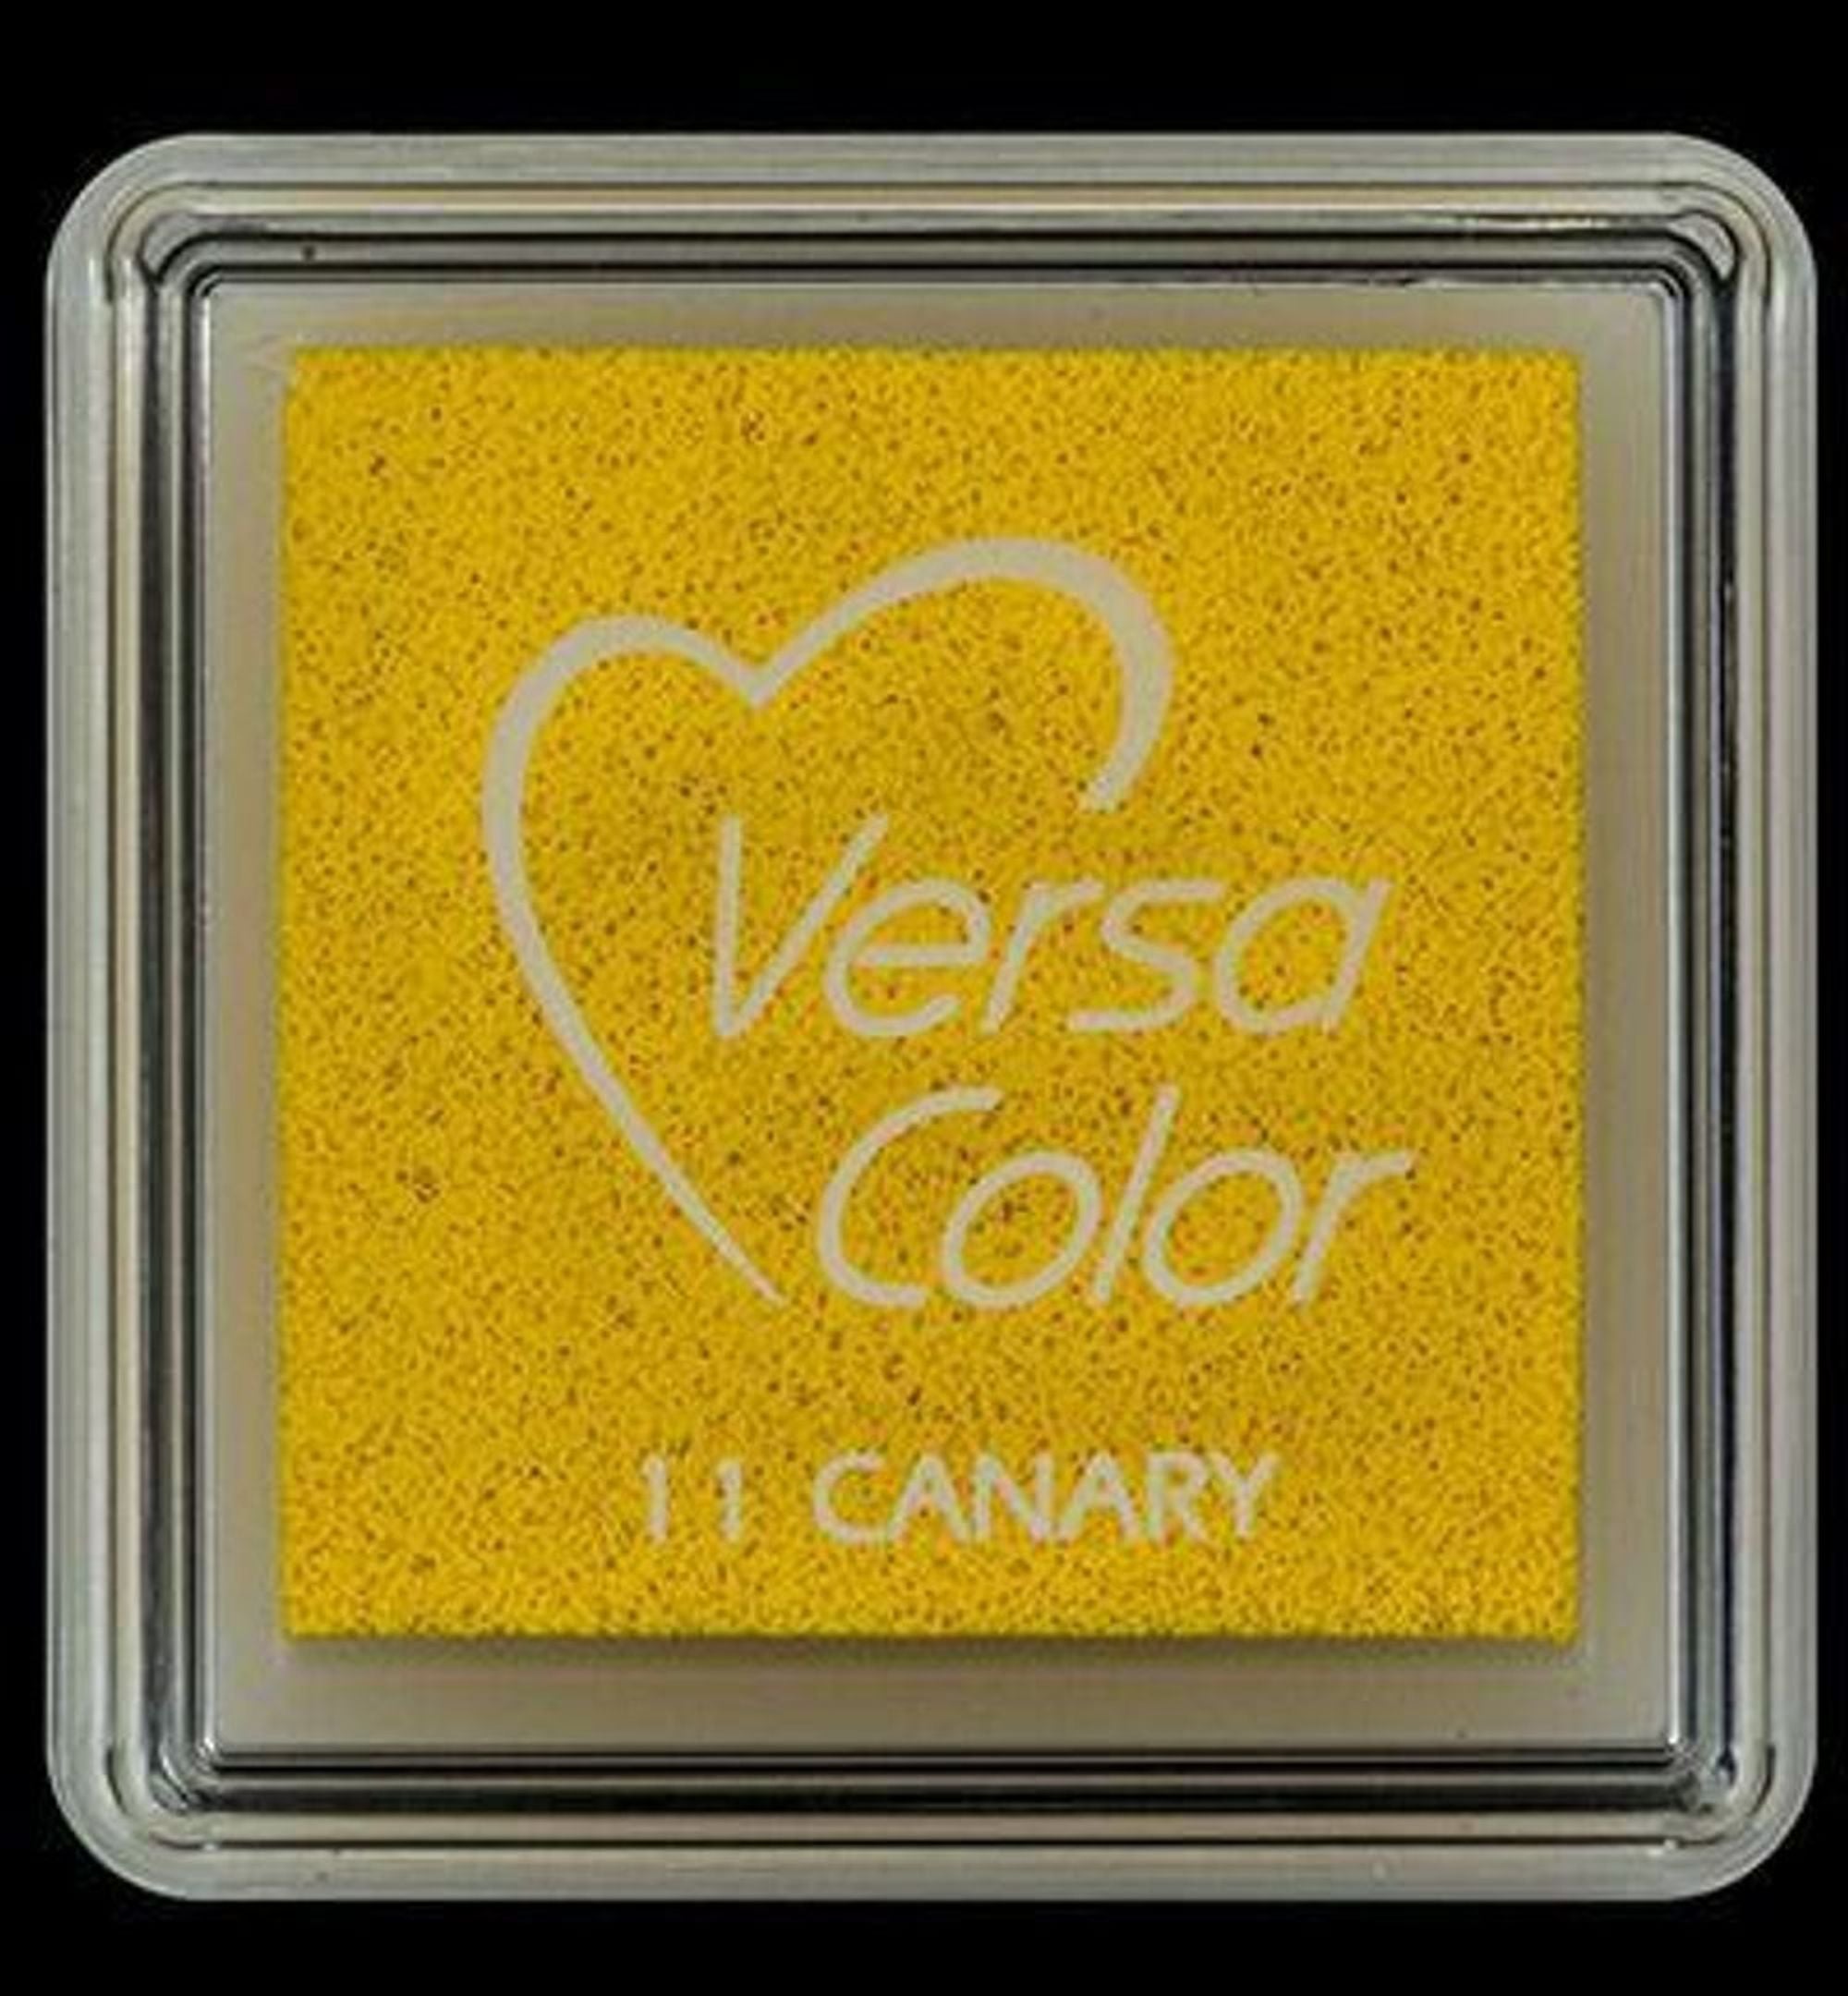 Versacolor Pigment Ink Pad Small in Black Black Inkpad Ink for Stamp Inkpad  for Rubber Stamp Versa Color Colour Ink Pad 